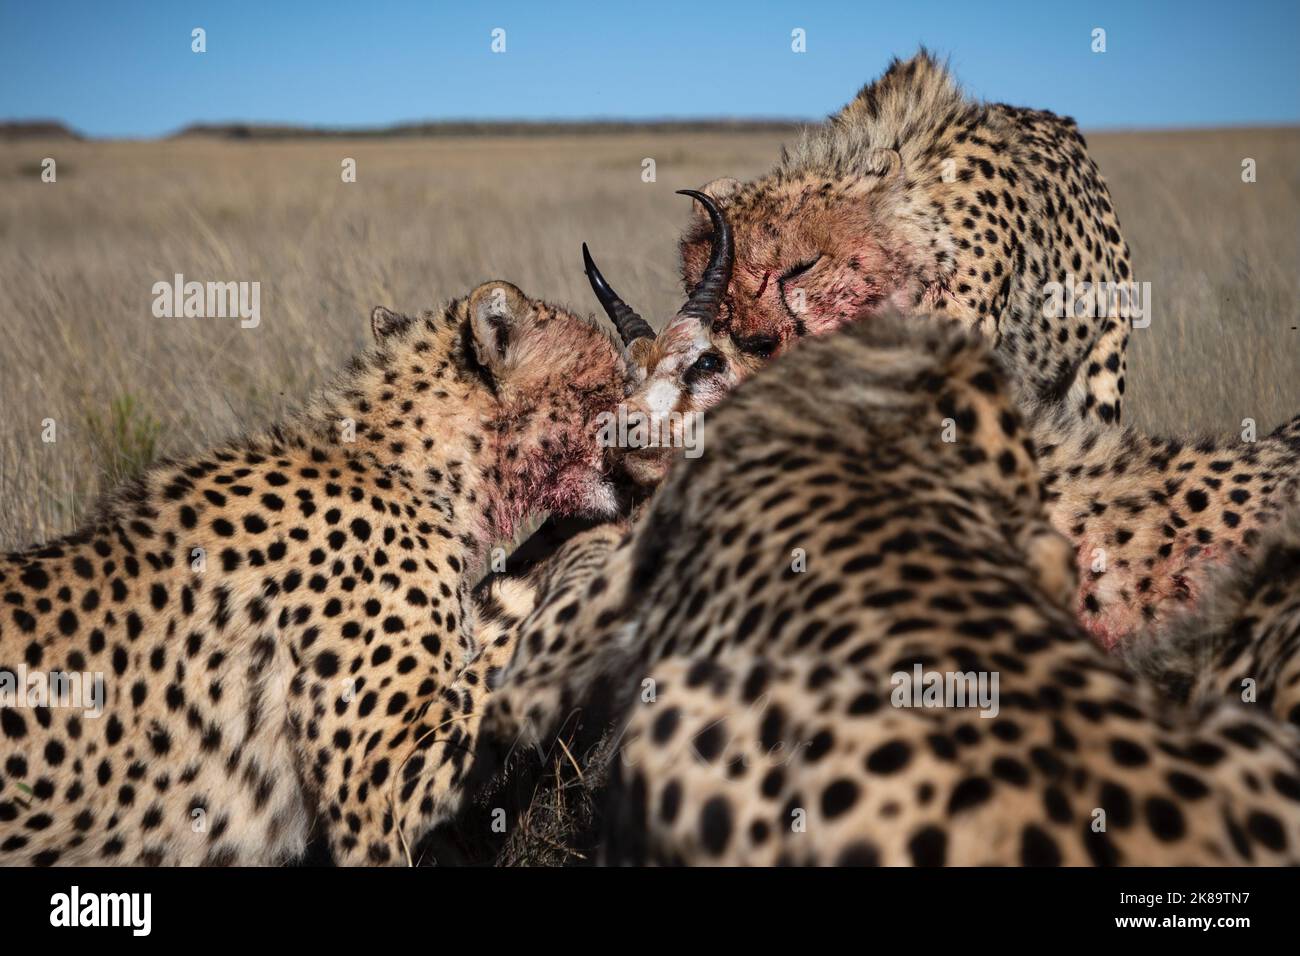 Cheetahs eating a springbok after a chase, photo taken a safari in South Africa Stock Photo